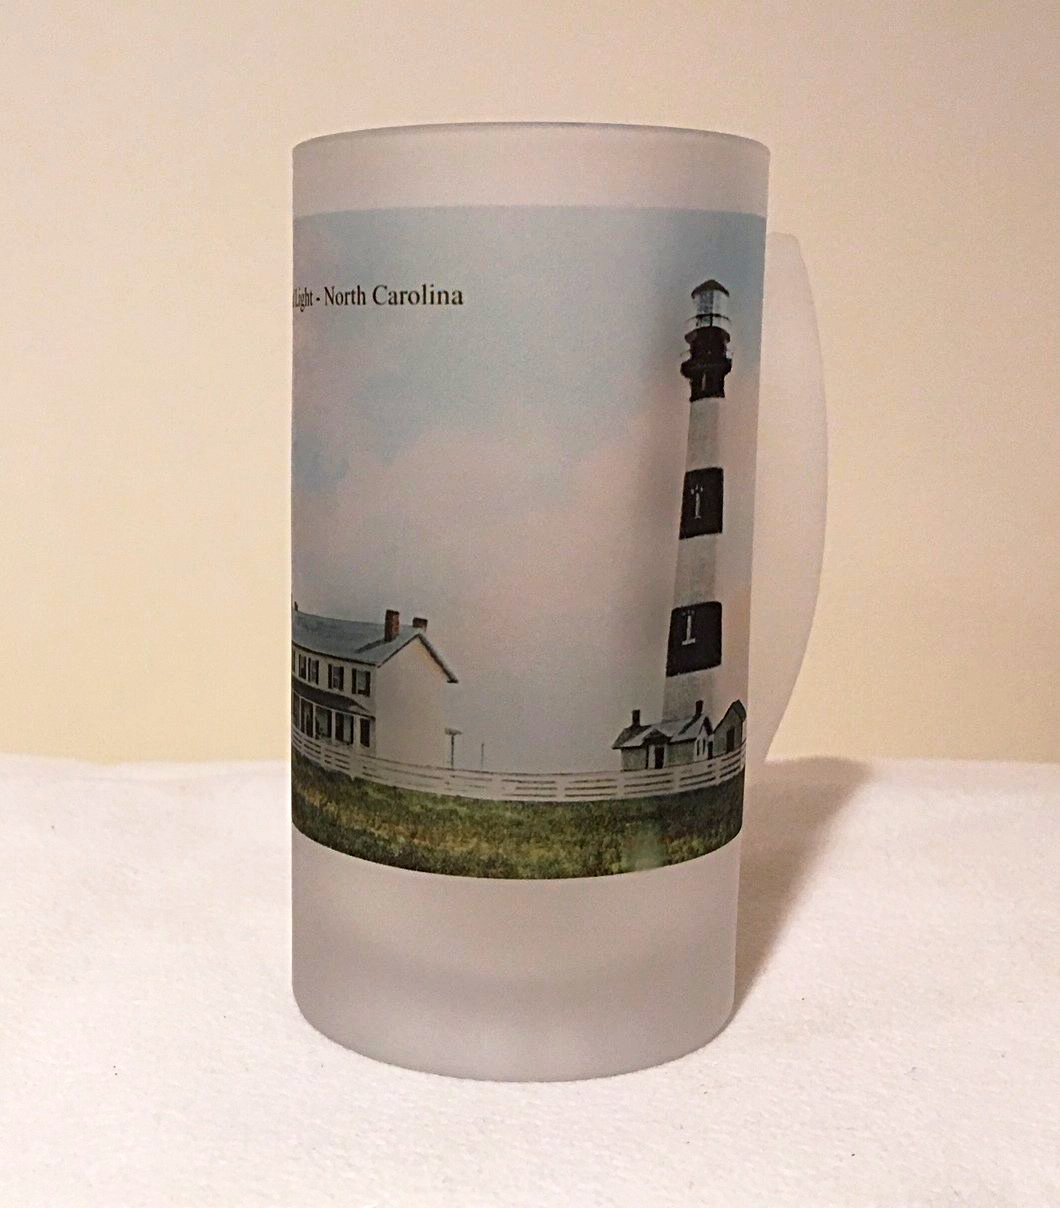 Colorful Frosted Glass Beer Mug Of North Carolina's Bodie Island Lighthouse - That Fabled Shore Home Decor